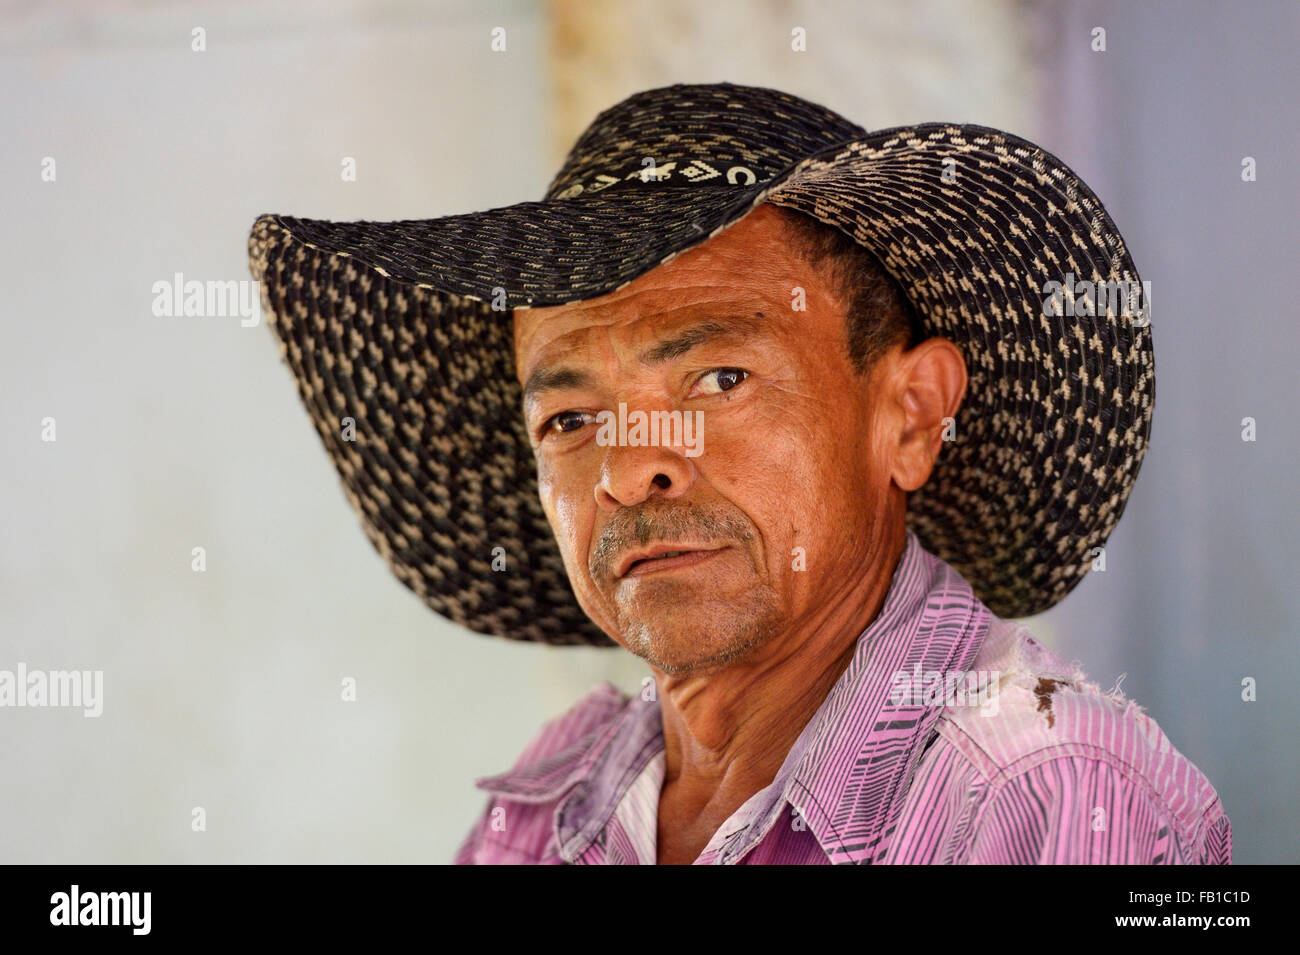 3,963 Colombia Hat Royalty-Free Photos and Stock Images